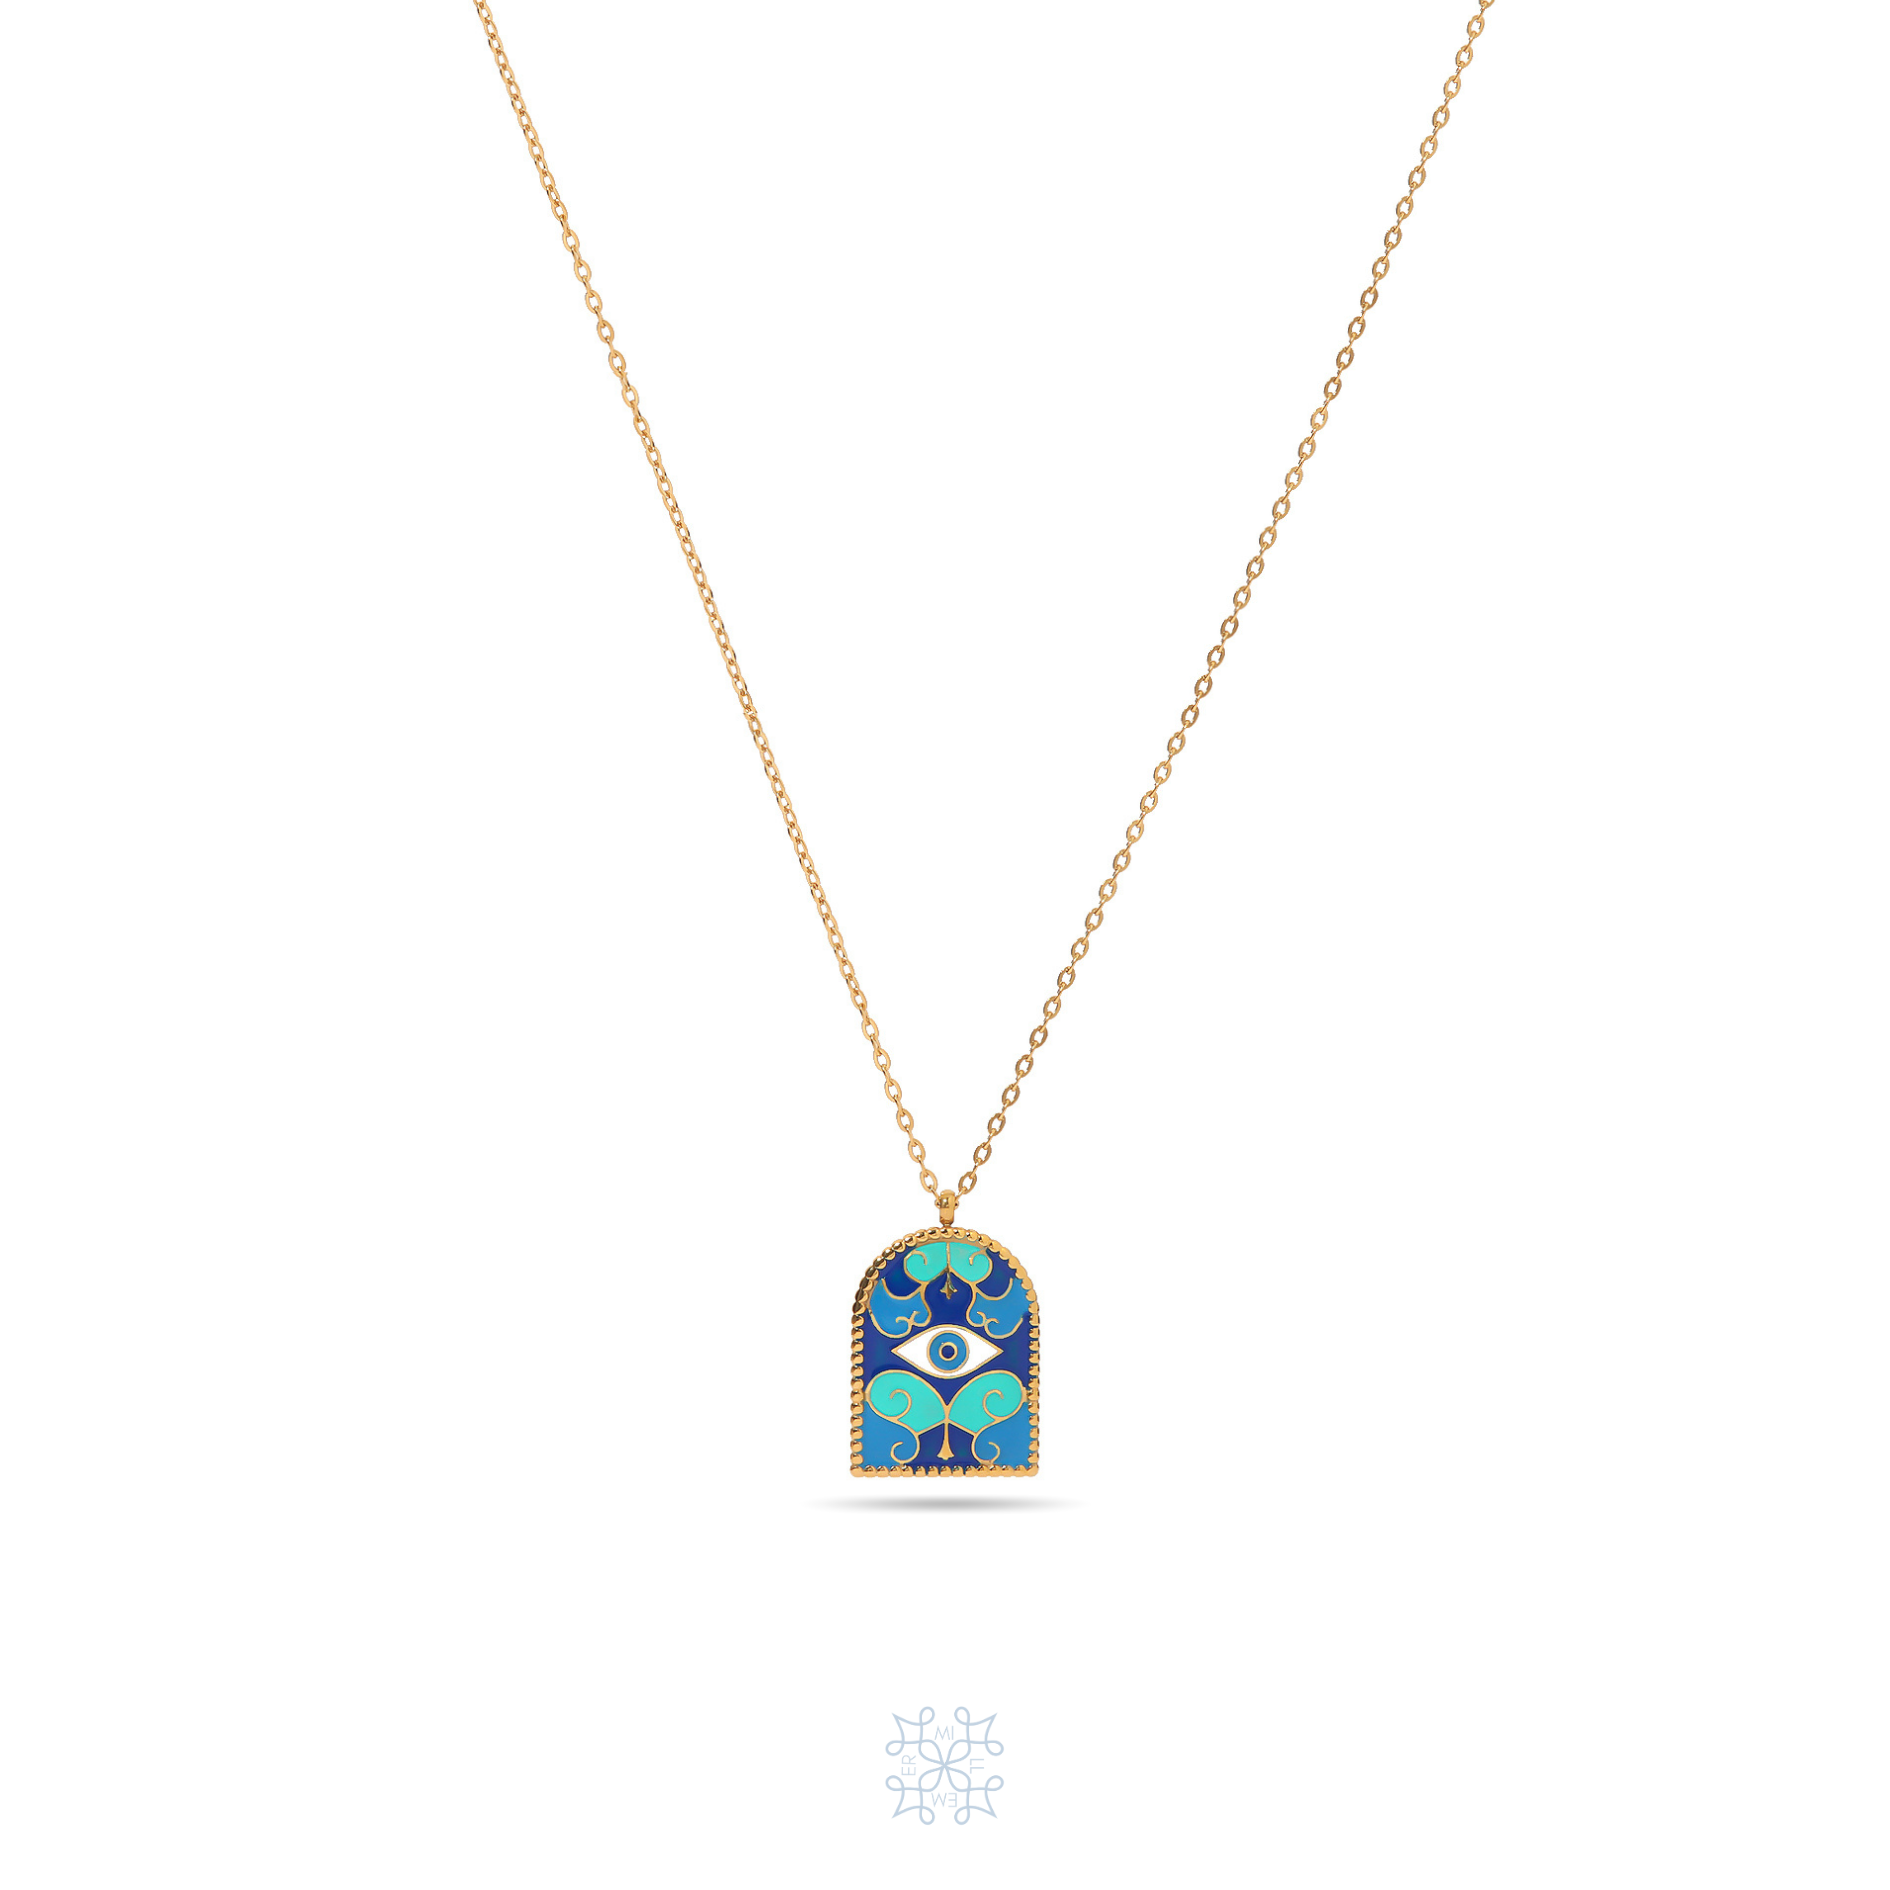 Gold plated chain necklace. Painted in blue , white and green enamel. the shapes of the enamel painting mimic the sea waves . In the middle of the pendant is painted an enamel eye. Ocean Pendant Blue Enamel Necklace.